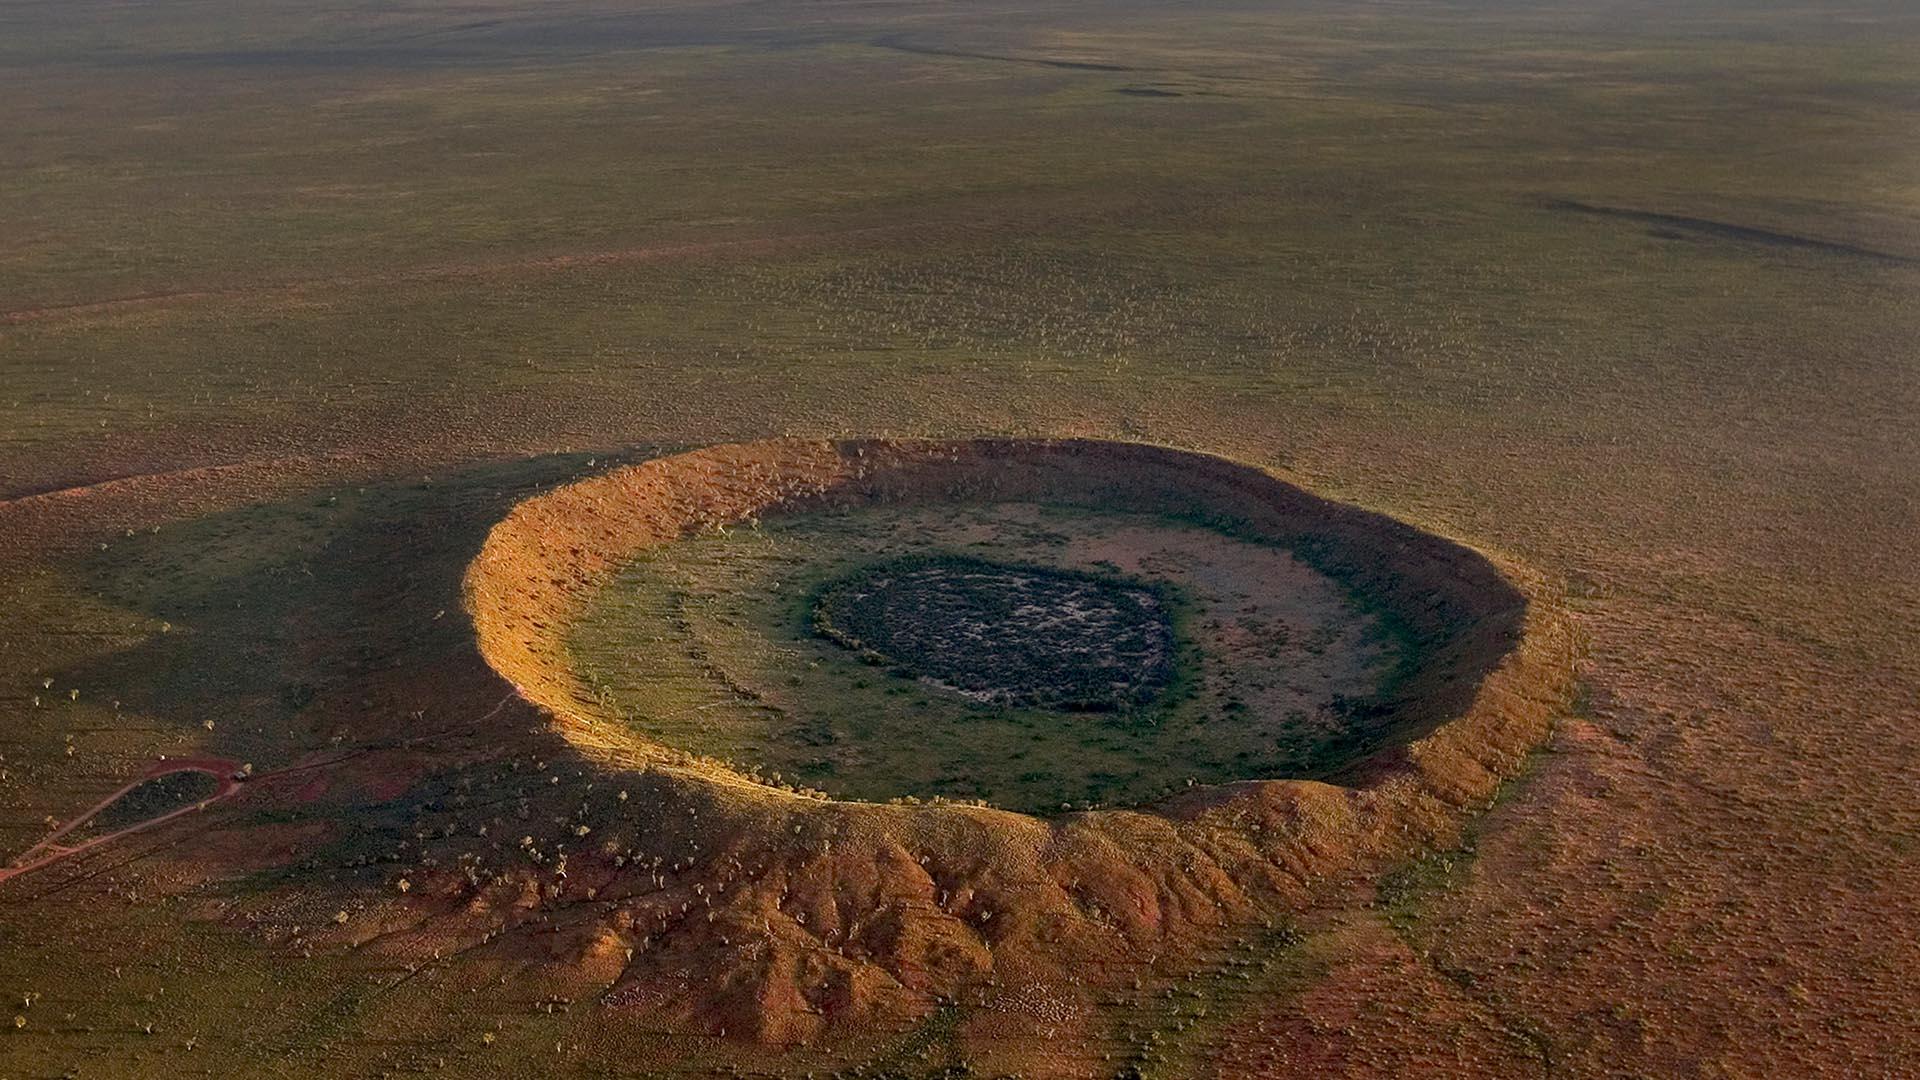 Geologists discover ancient meteorite impact crater in 